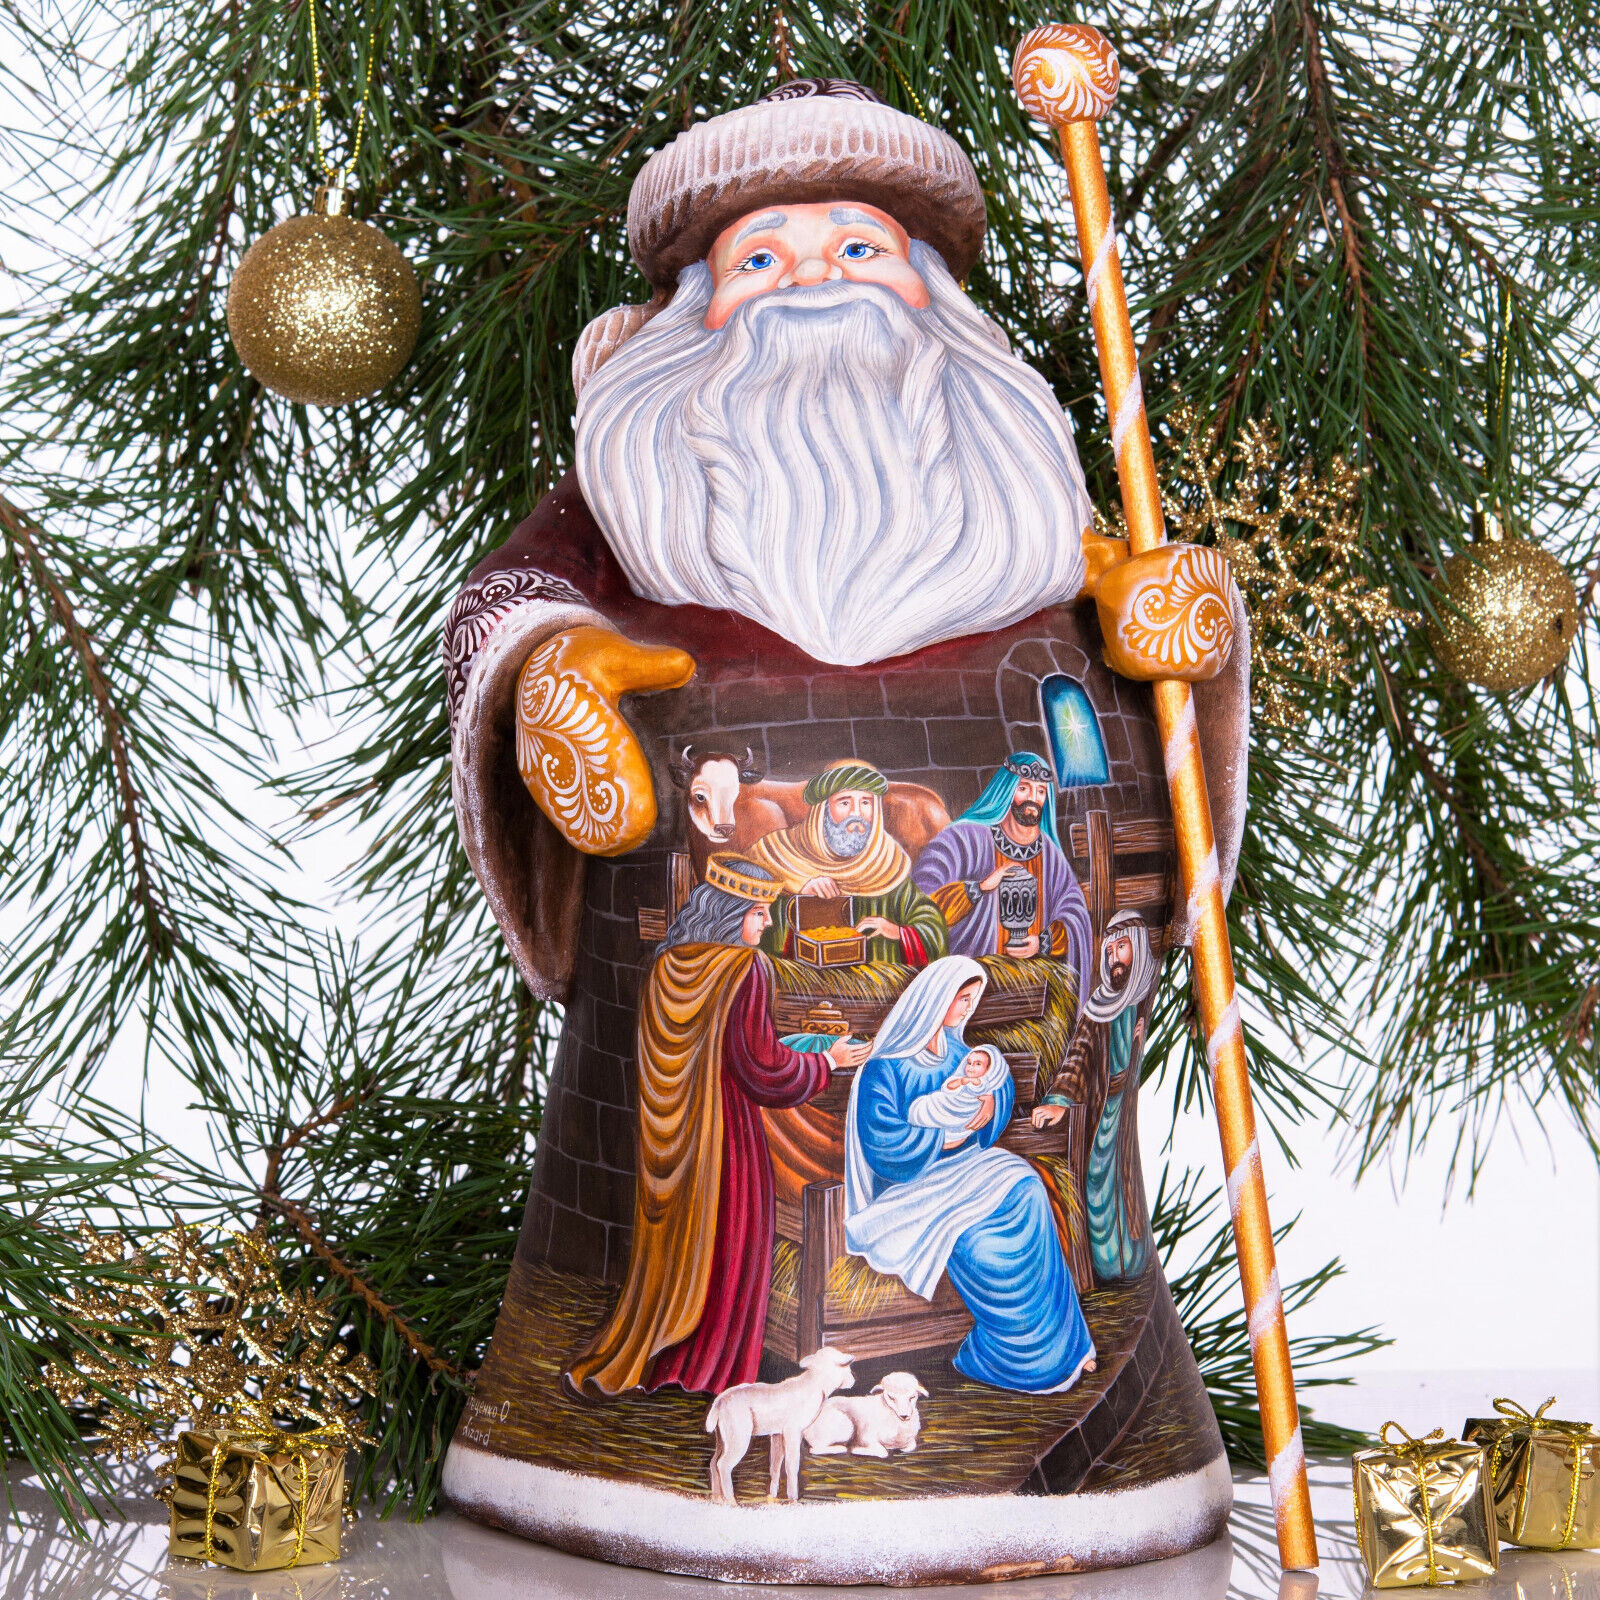 Hand carved wooden Santa Claus figurine Nativity Scene Exclusive Christmas gift